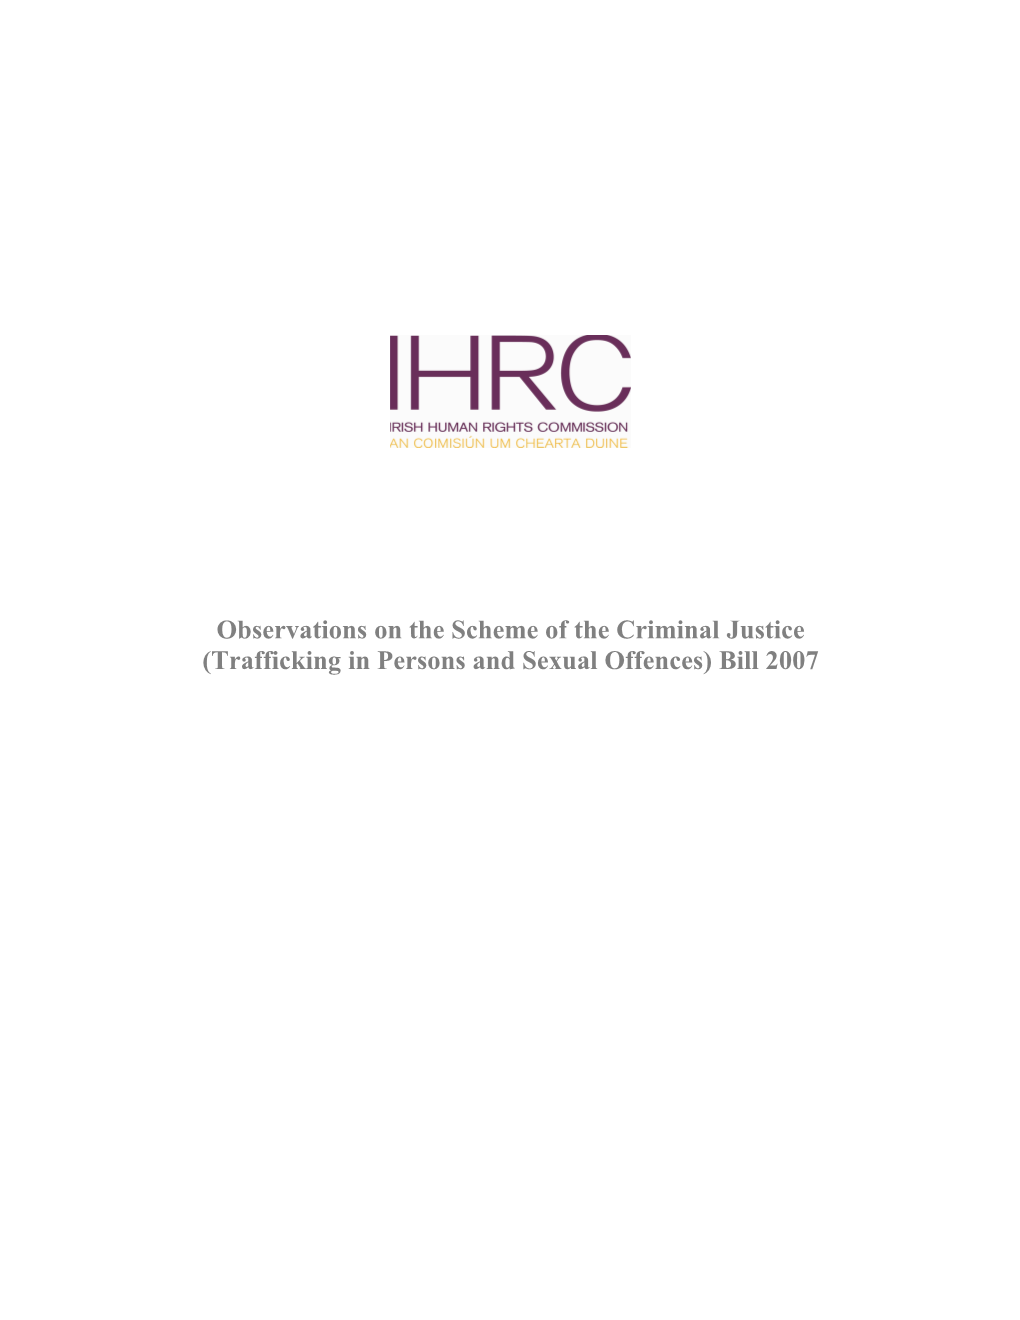 DRAFT - an Analysis of the Human Rights Issues Raised by the General Scheme of the Criminal